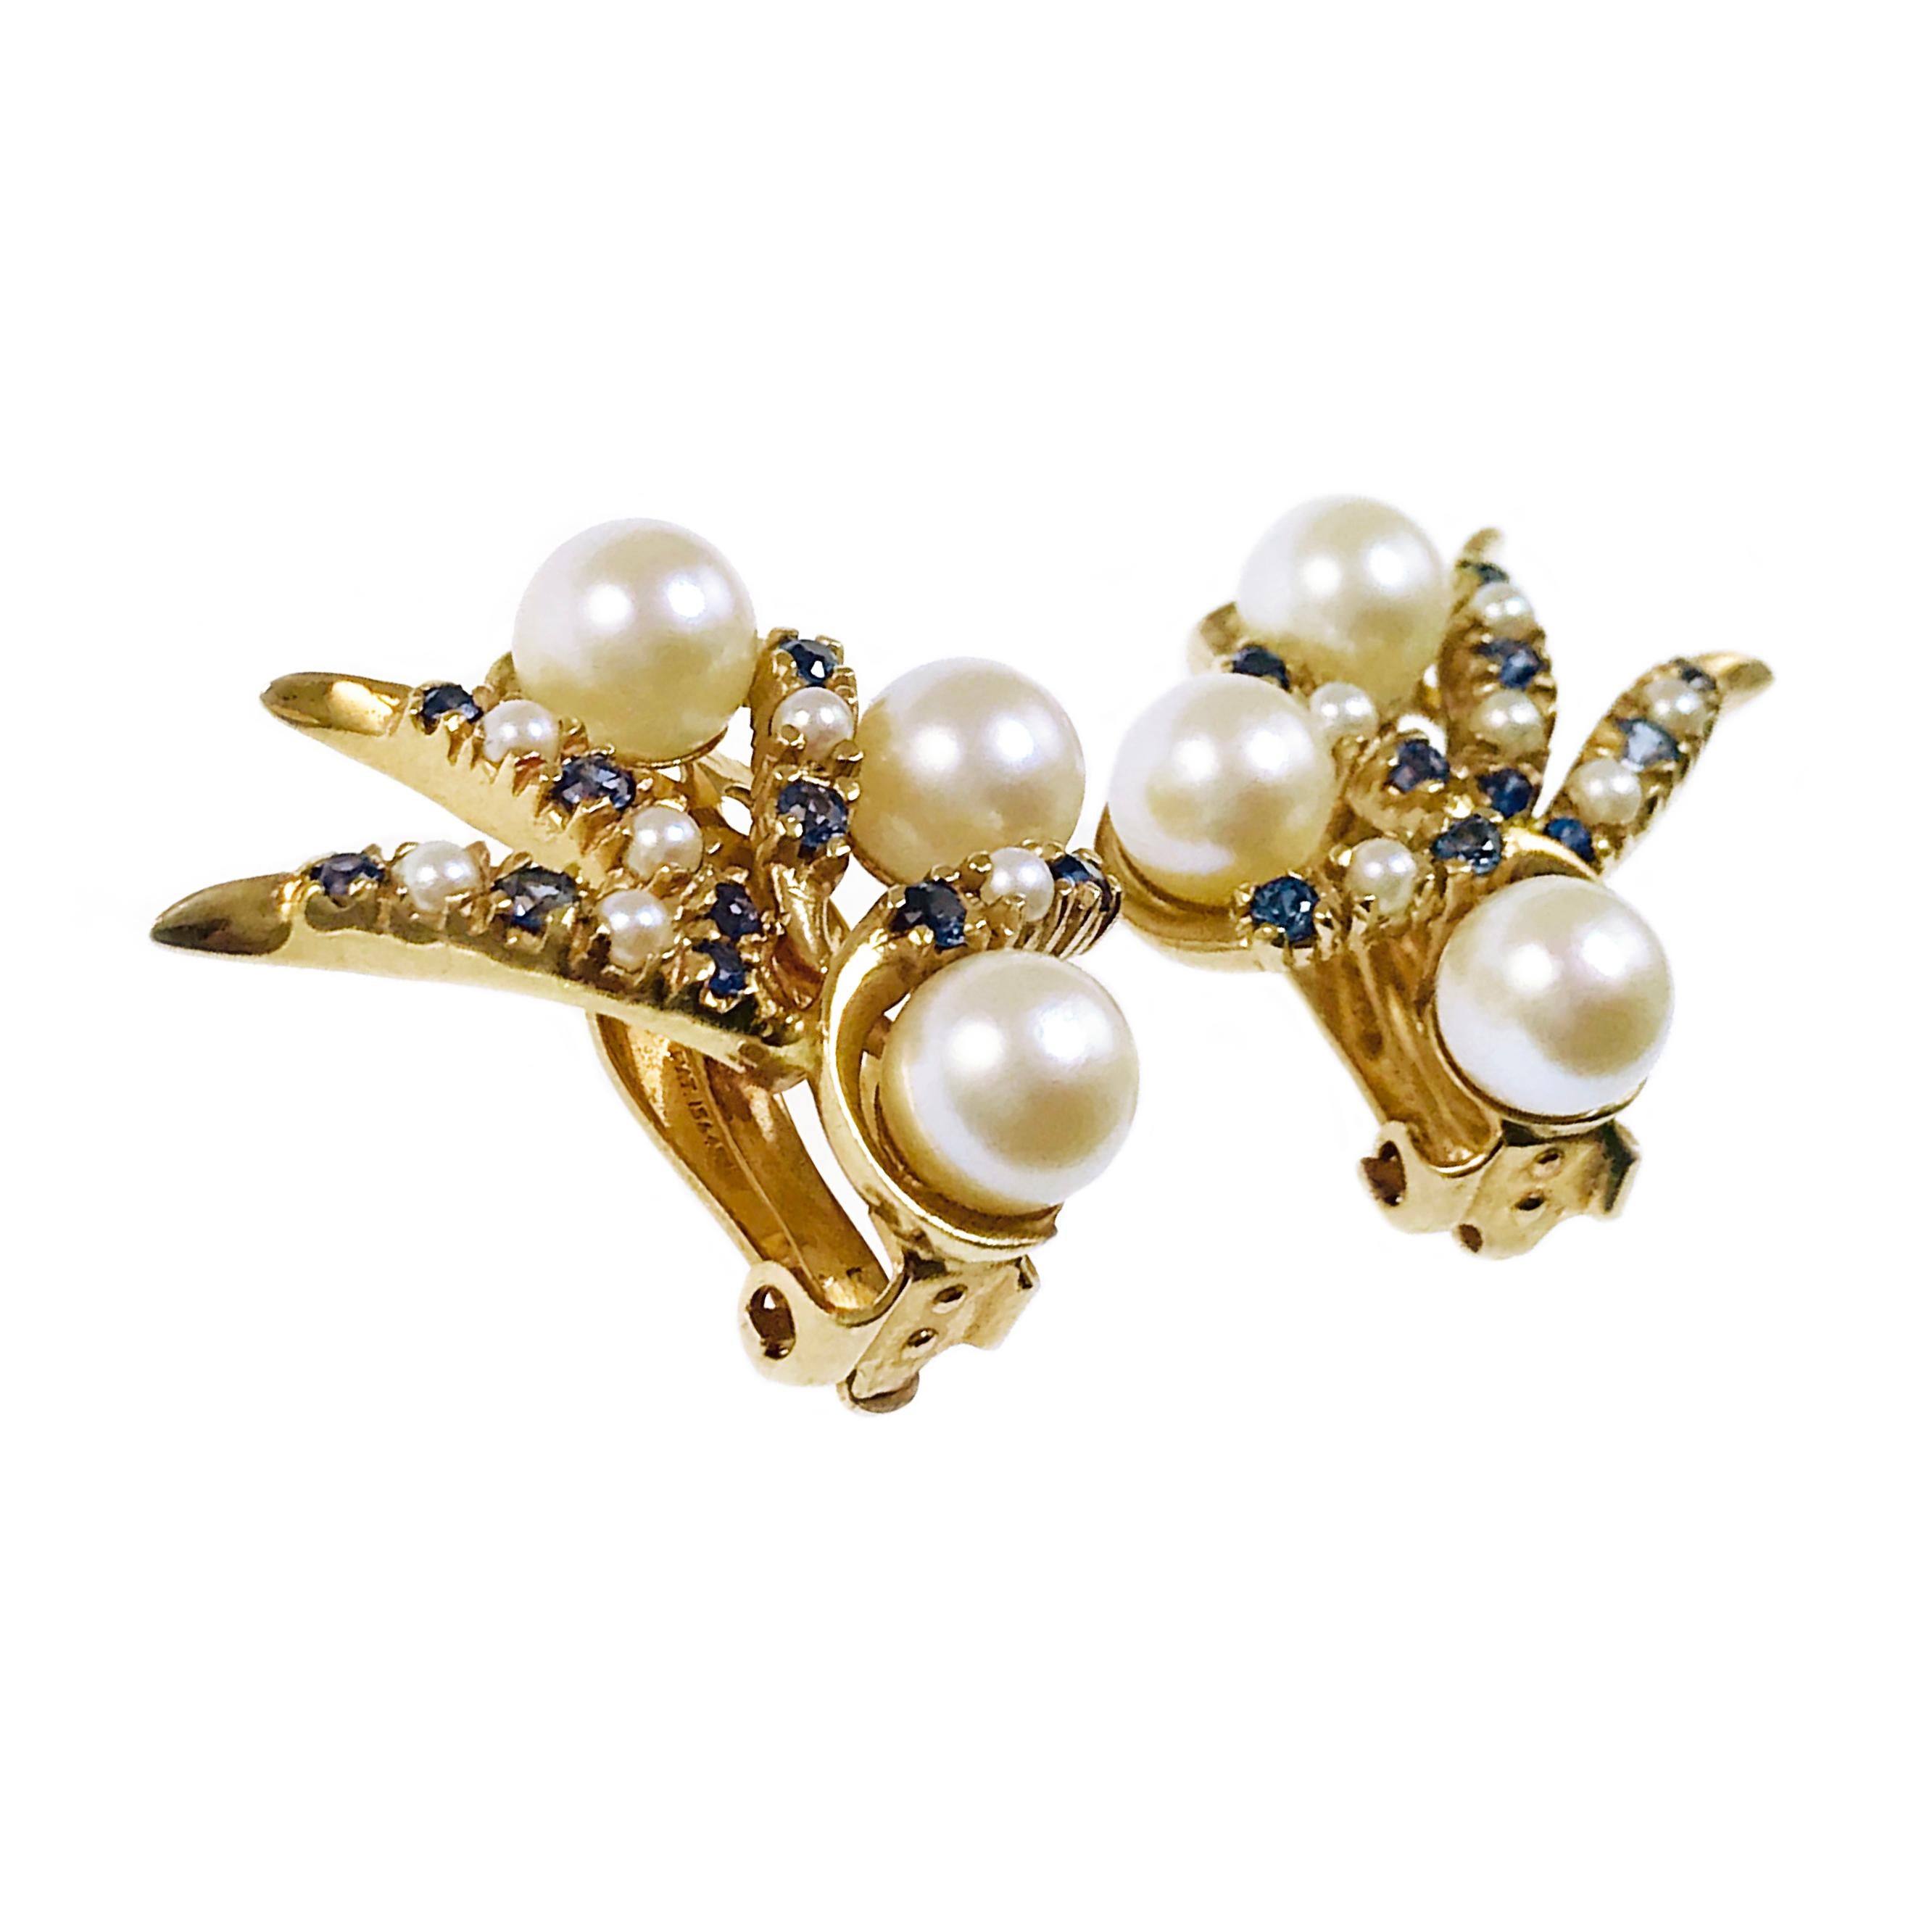 Pearl Sapphire Clip-On Earrings. Three large pearls 6.5mm adorn each earring, six smaller pearls and ten blue sapphires are bead-set in swirls of yellow gold. The 2mm round sapphires have an approximate weight of 0.04ctw, sapphires are approximately